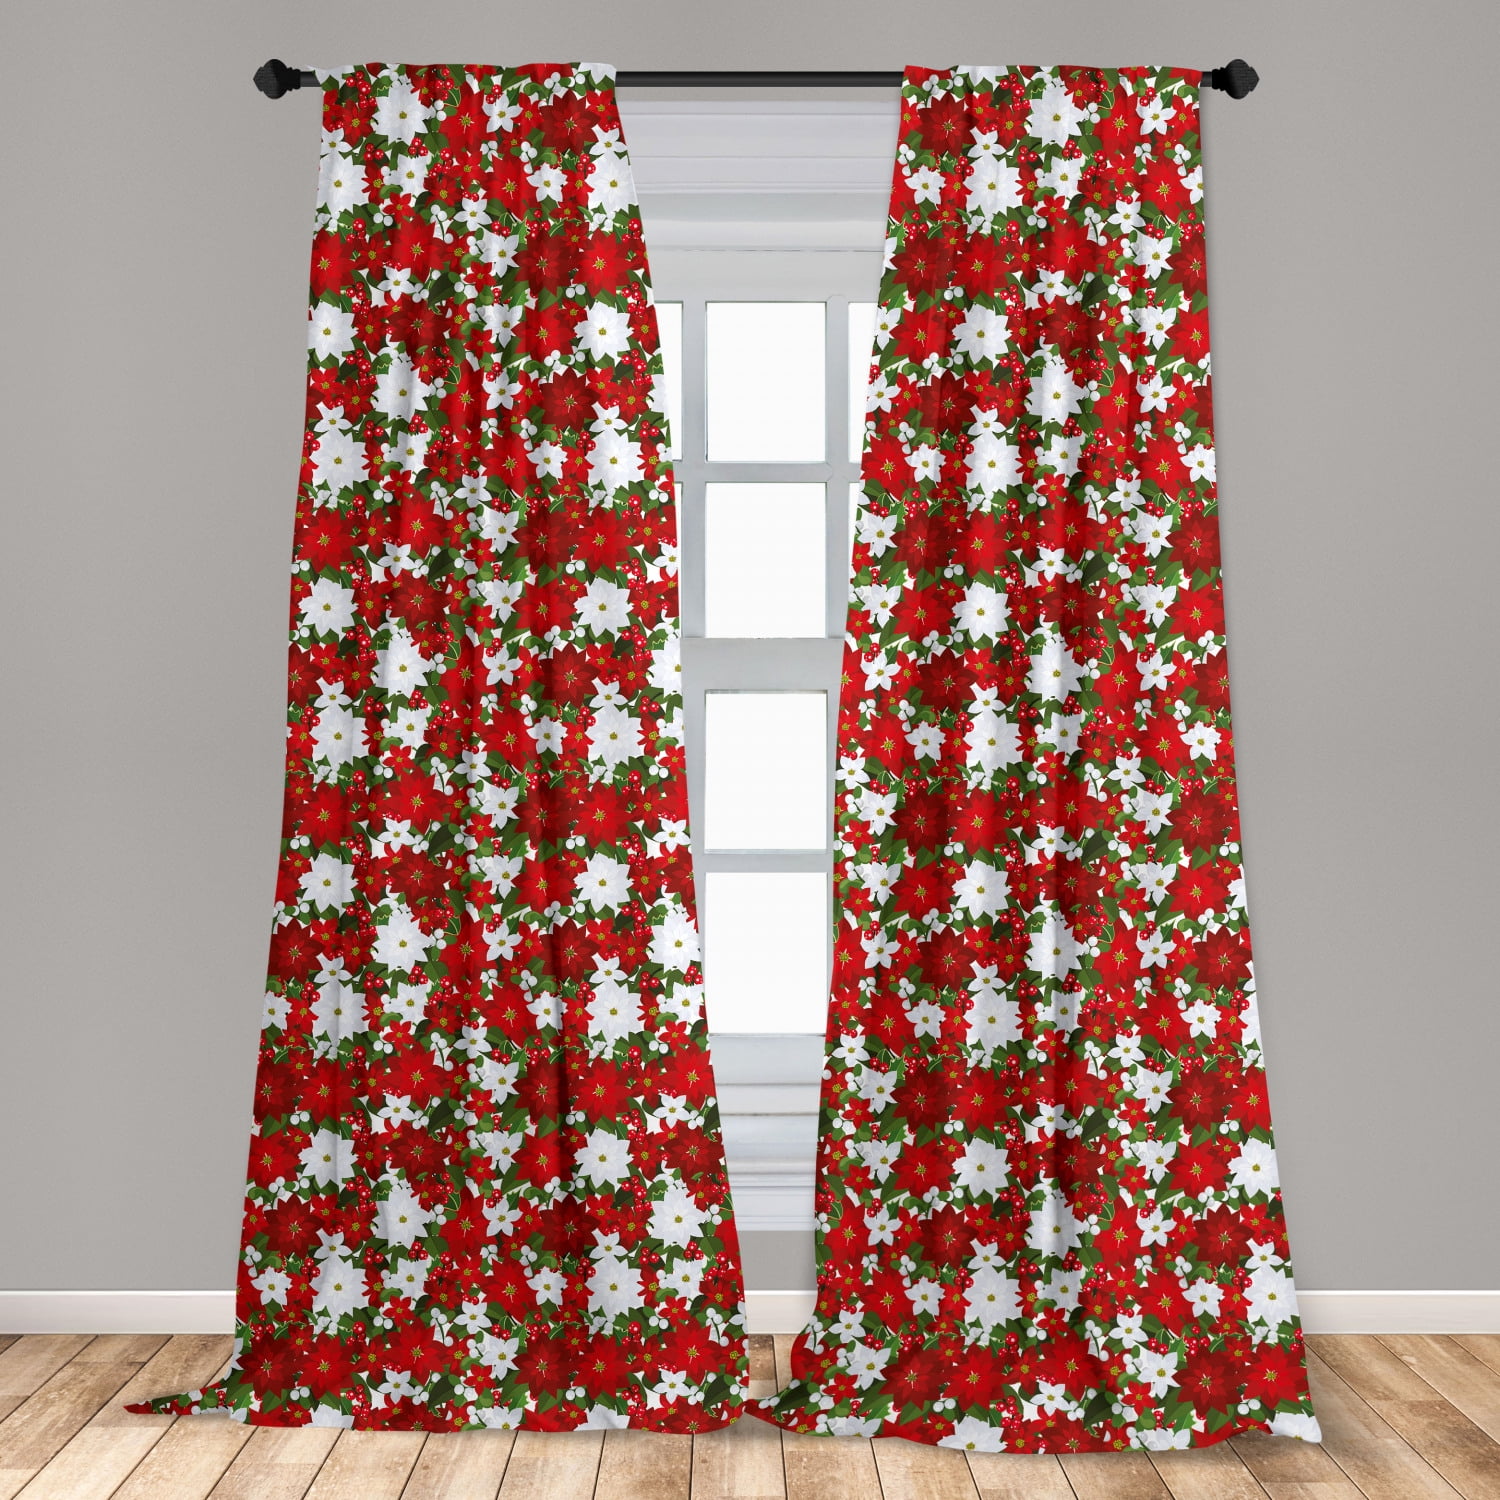 London Street Red Phone Box 3D Blockout Photo Printing Curtains Draps Fabric Win 